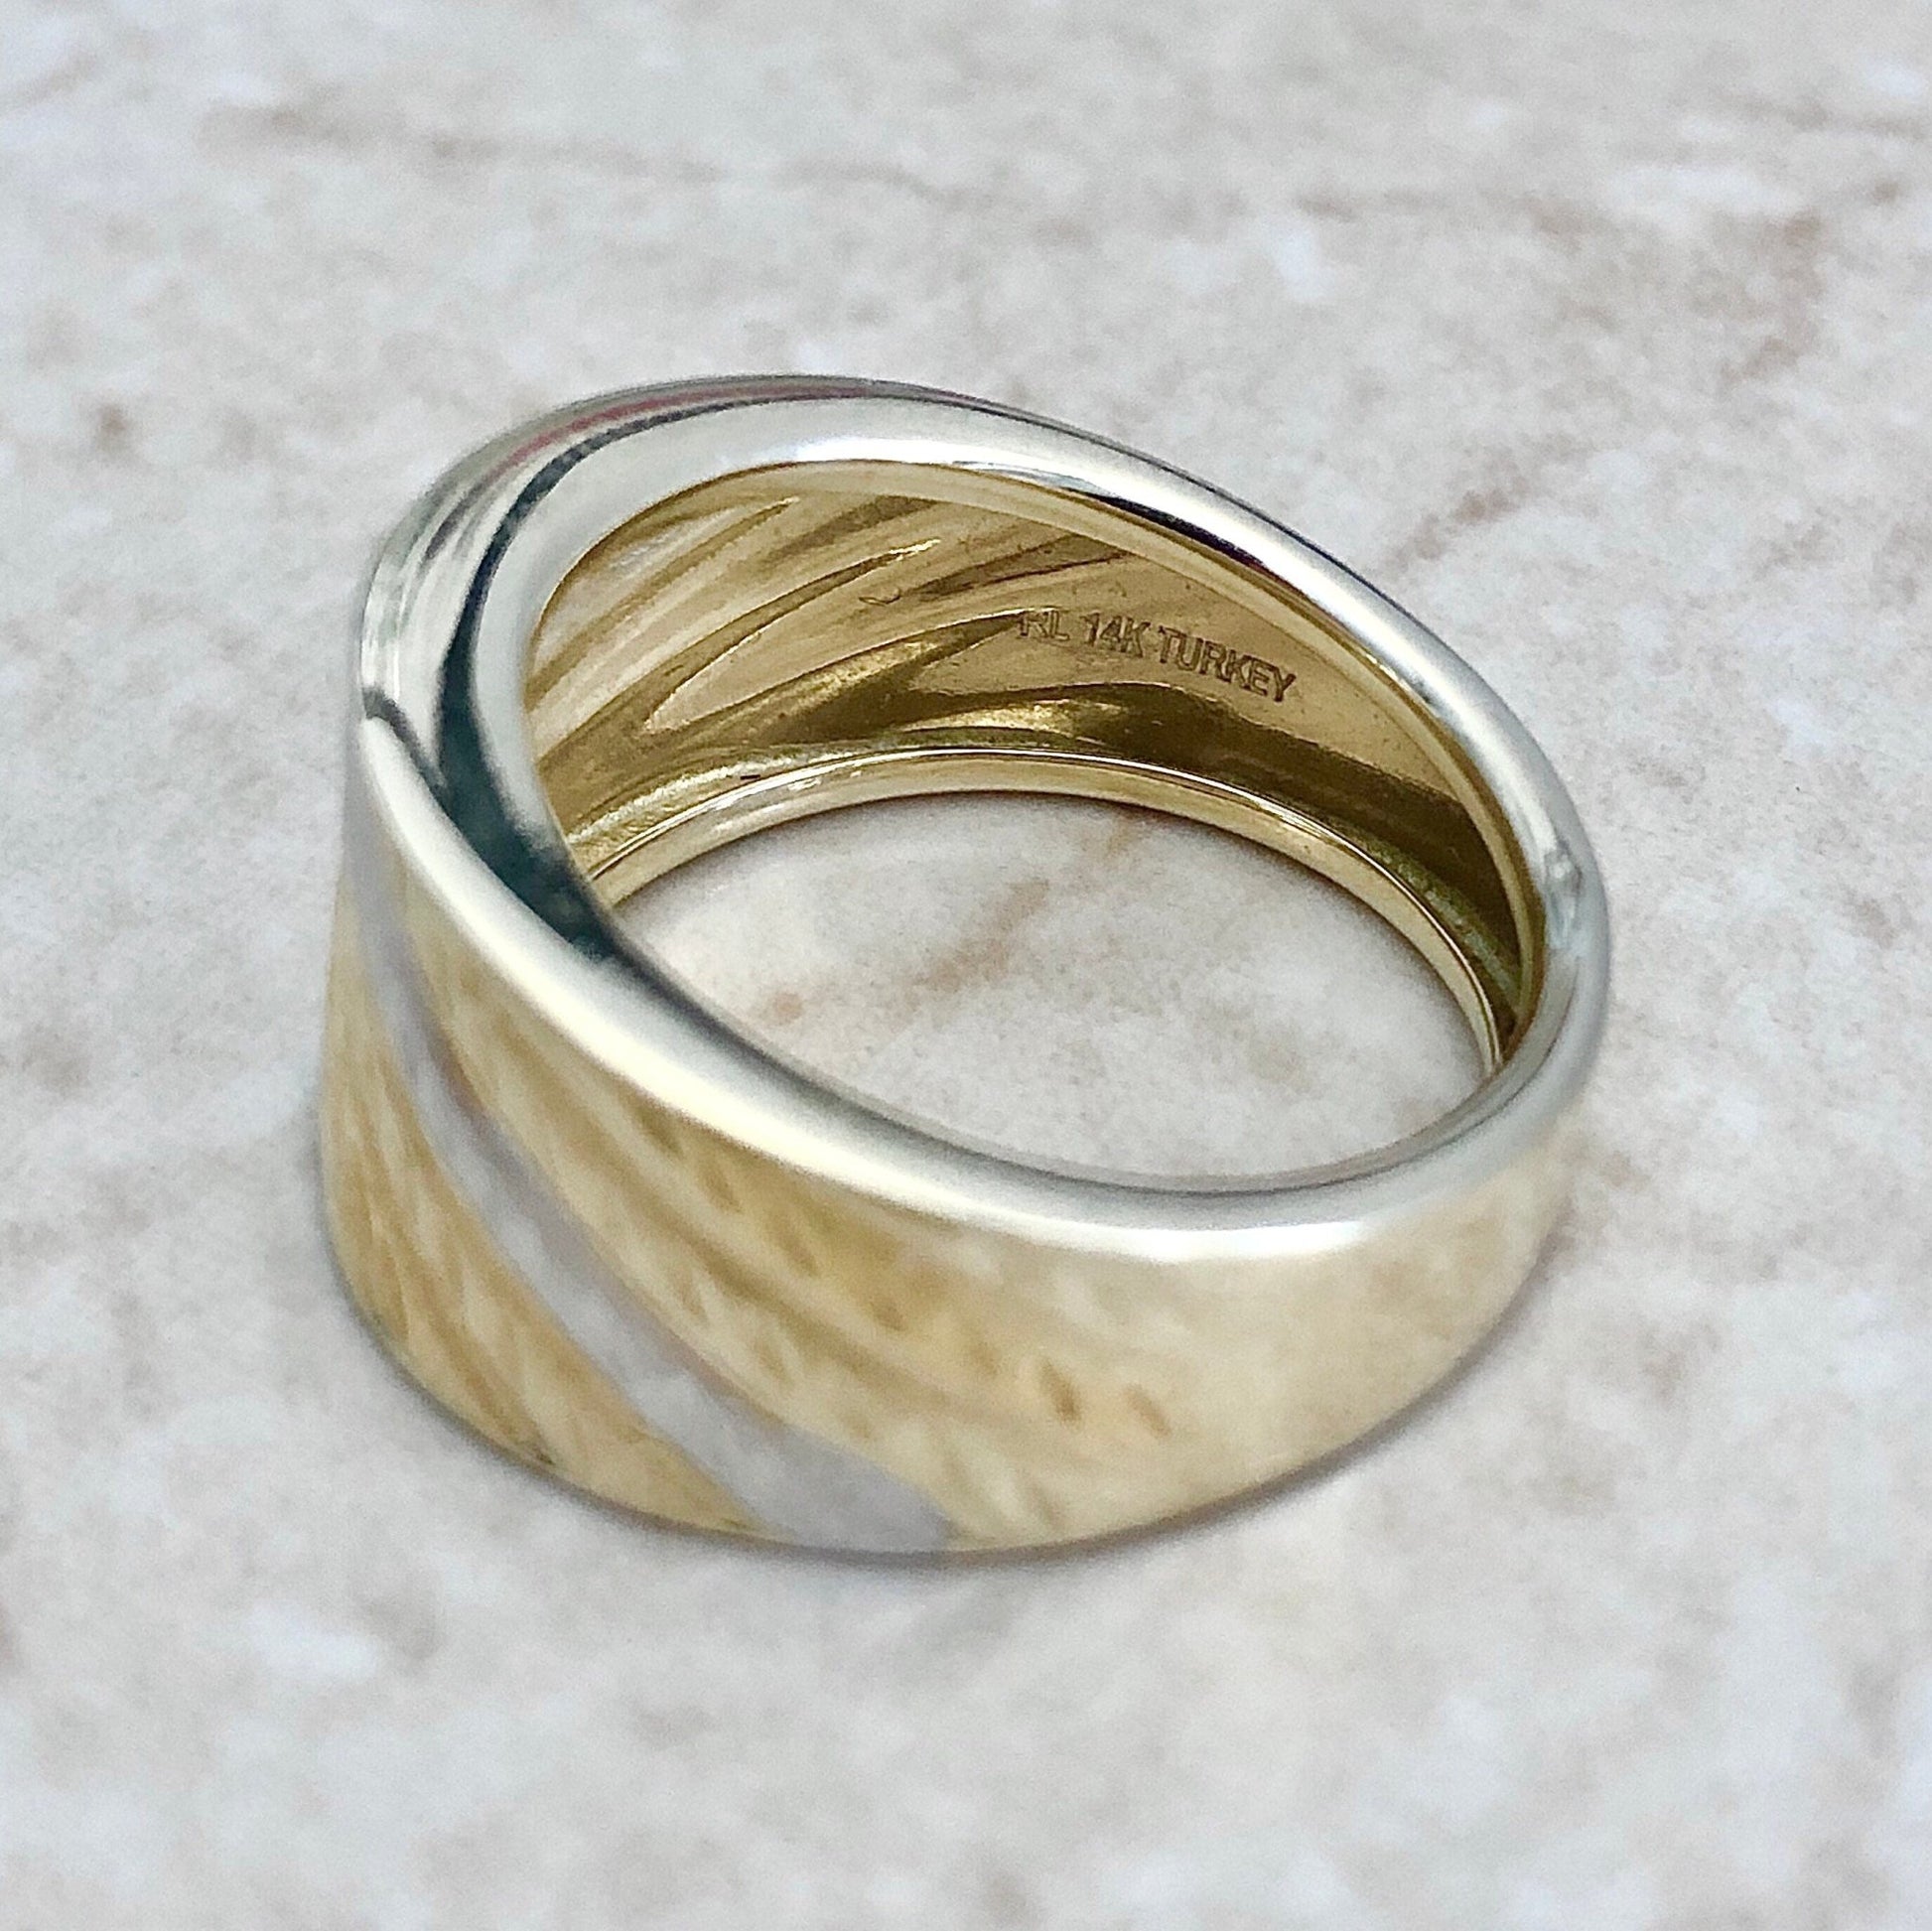 14 Karat Two Tone Gold Band Ring - Wedding Band - Birthday Gift - Bridal Ring - Size 7 US - Christmas Gift For Her - Jewelry Sale